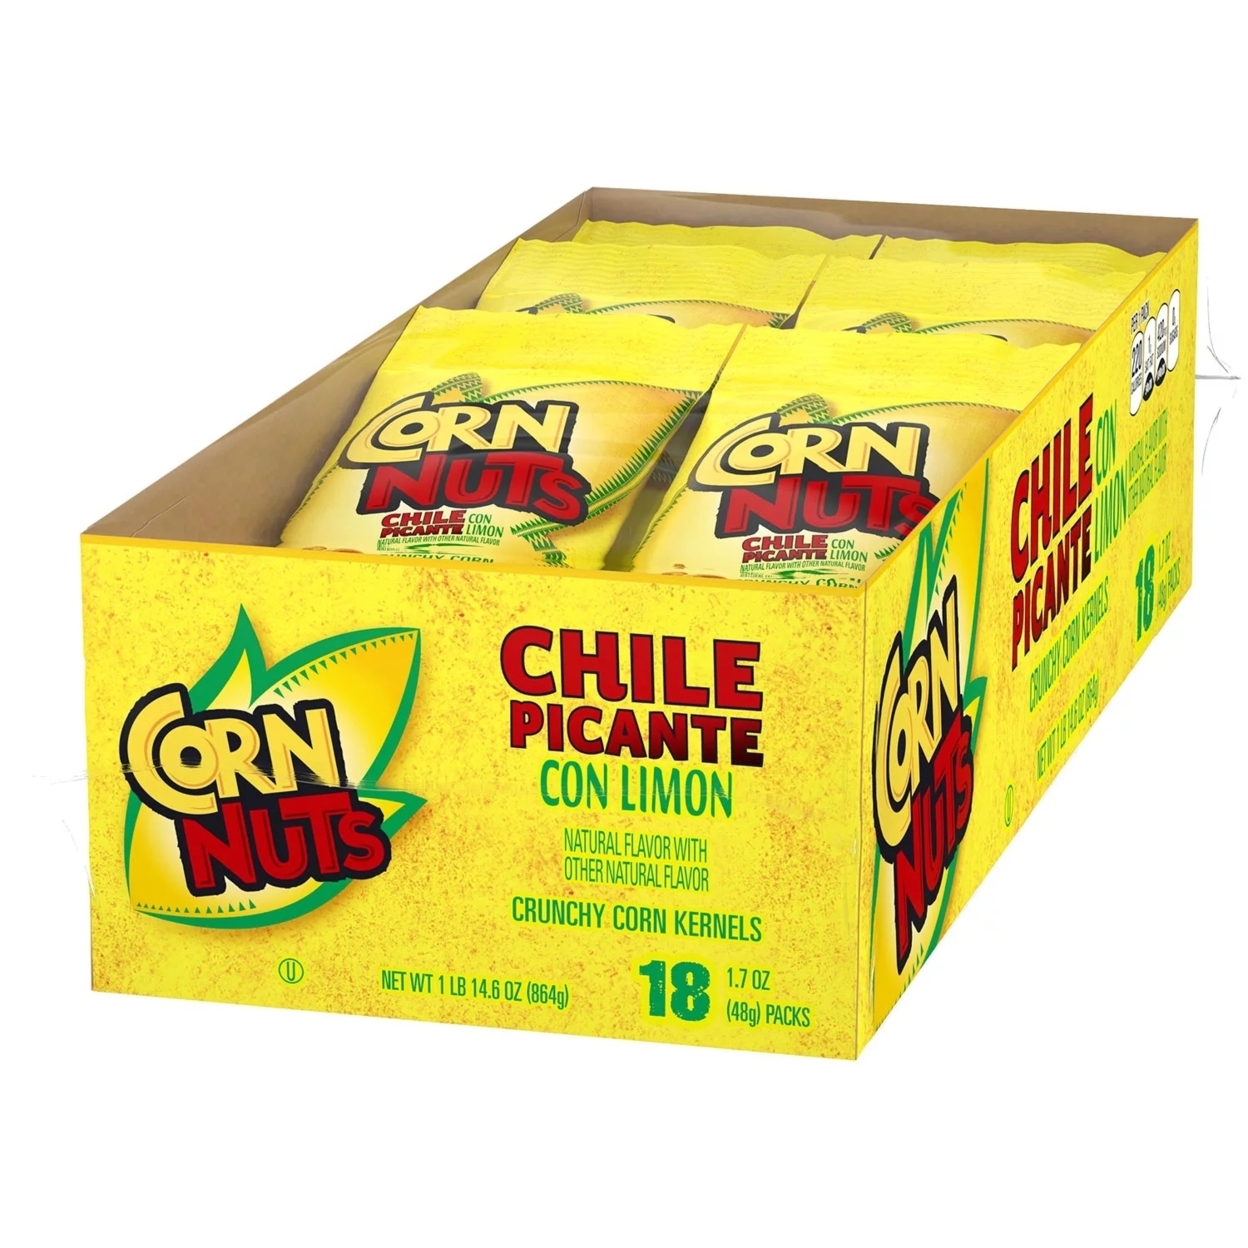 Corn Nuts Chile Picante Con Limon Crunchy Corn Kernels, 1.7 Ounce (Pack Of 18)